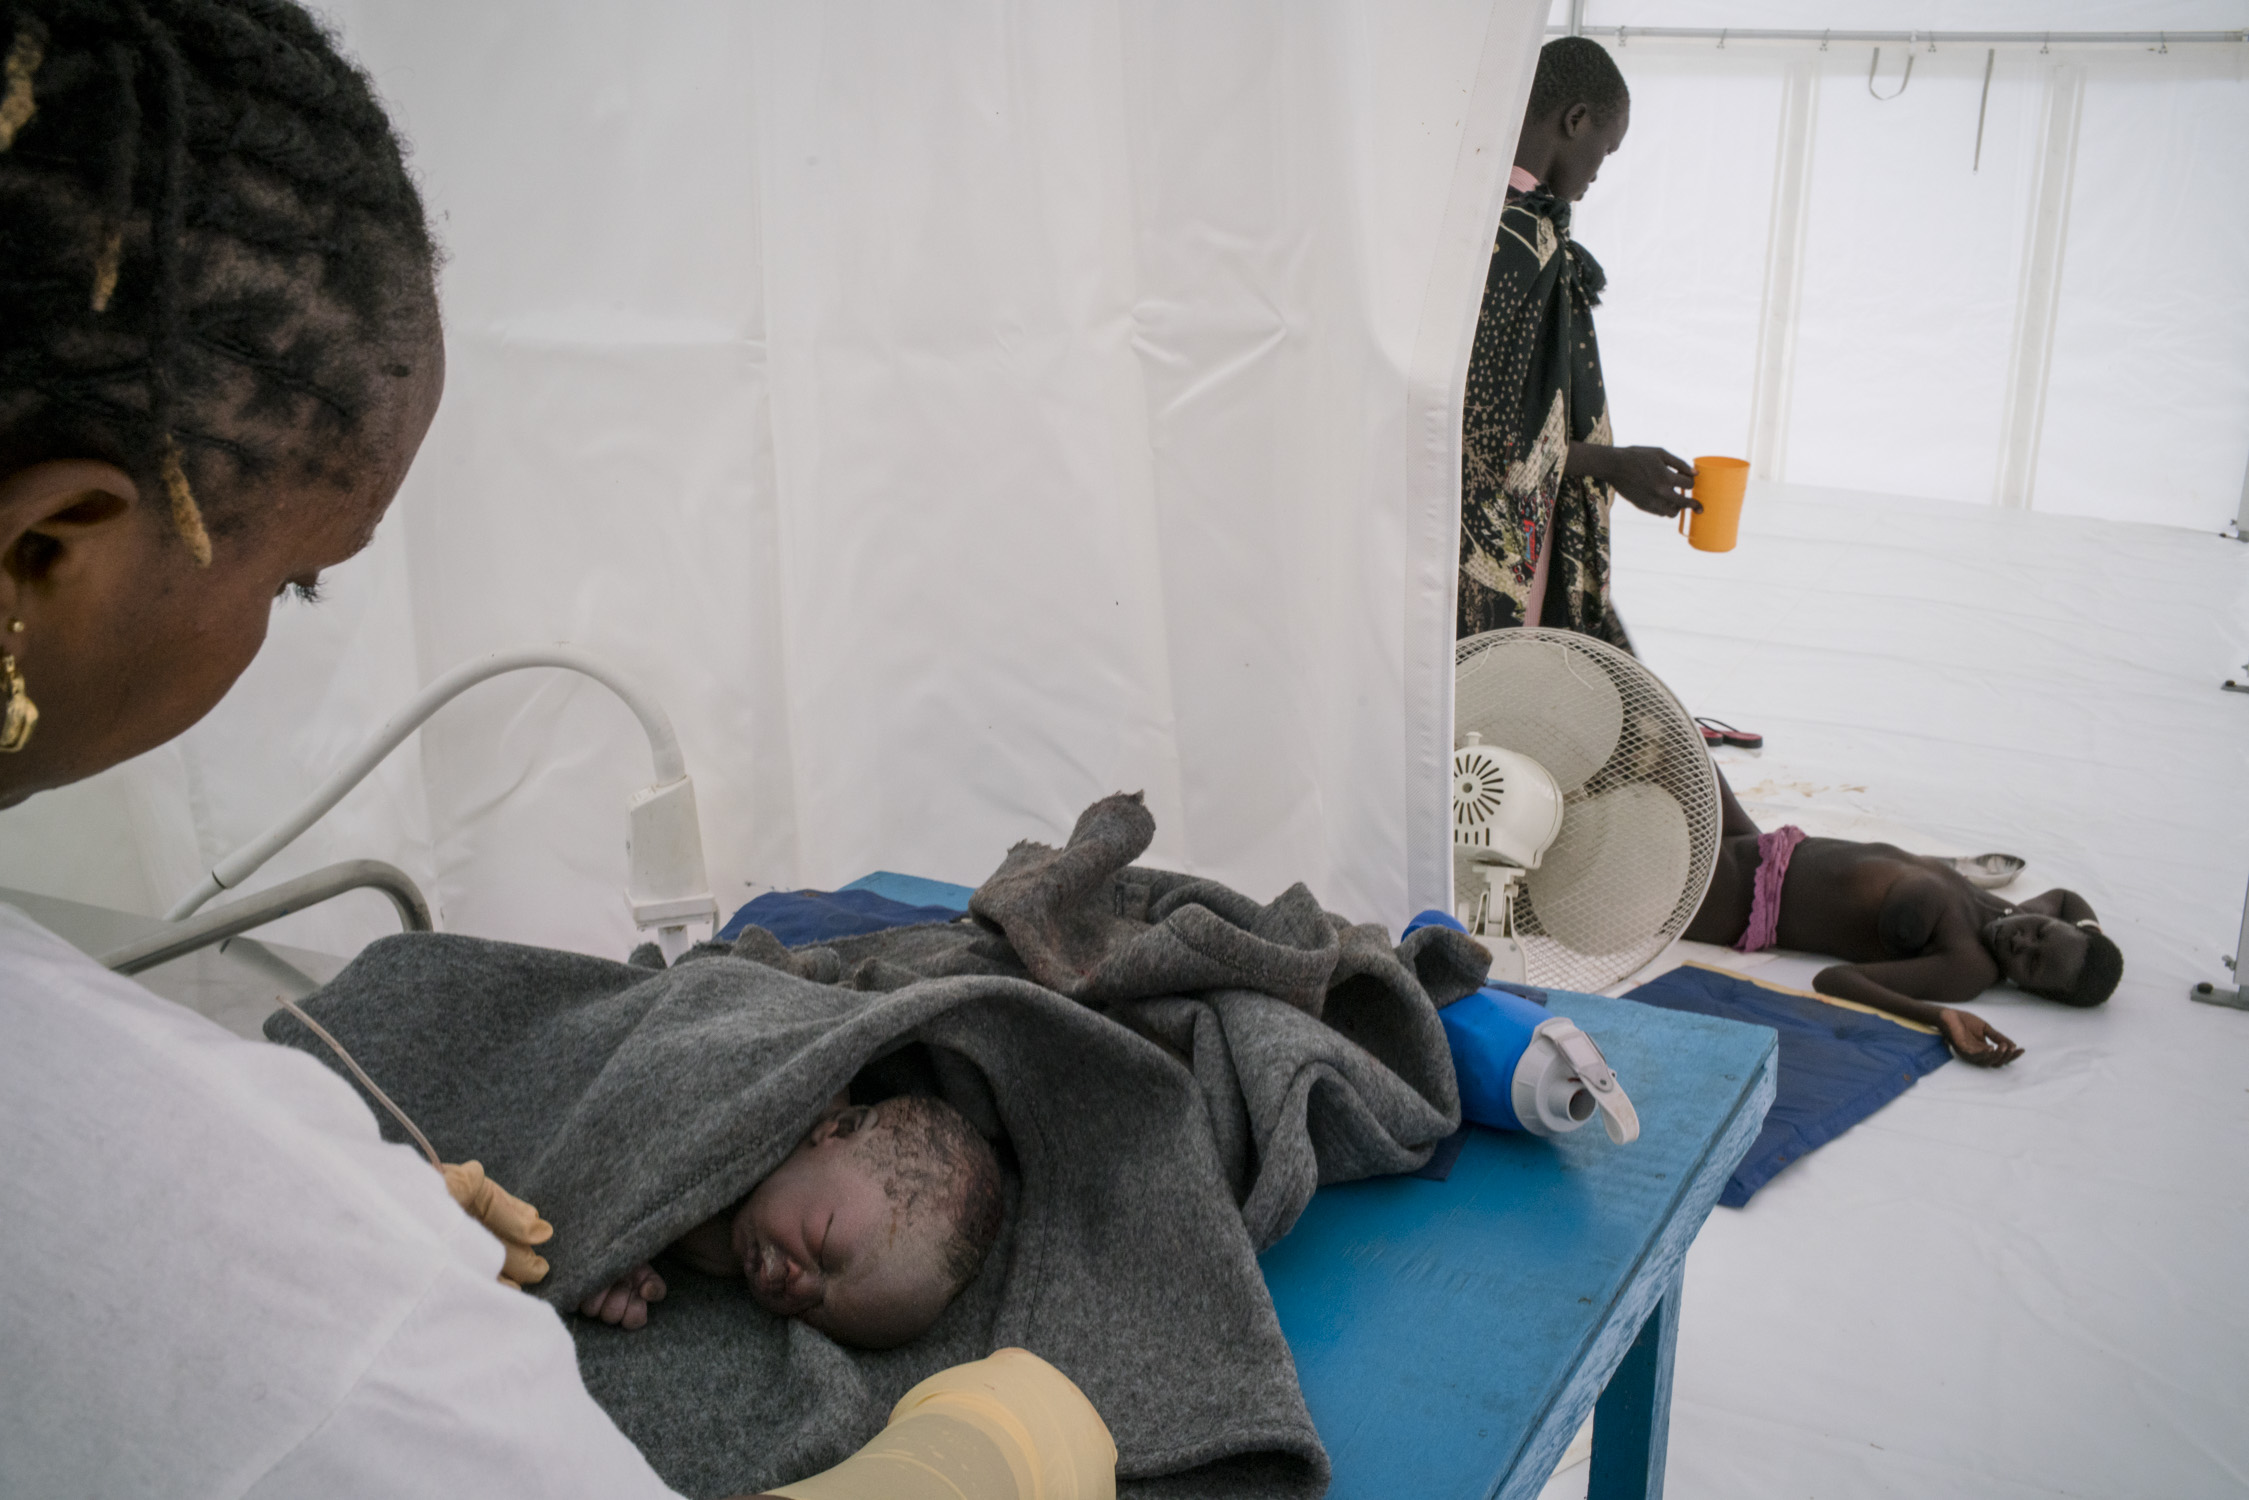  A midwife tends to a newborn who is not breathing or suckling as normally expected, suggesting birth defects,&nbsp;while his mother lies collapsed on the floor of the MSF hospital tent after an extremely difficult delivery. After six children, givin